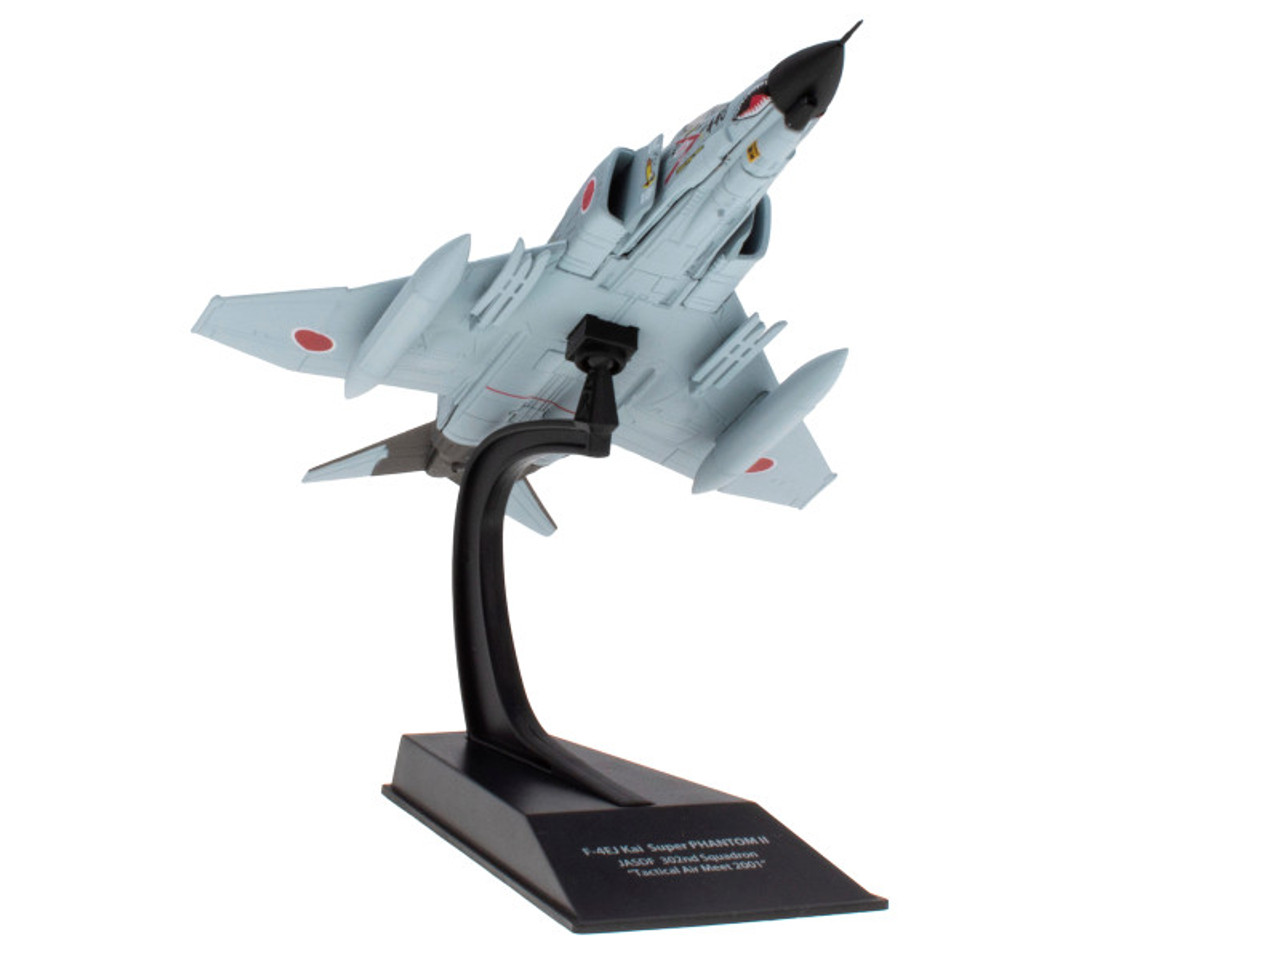 Mitsubishi F-4EJ Kai Super Phantom II Fighter Aircraft "302nd Squadron 83rd Air Wing Tactical Air Meet" (2001) Japan Air Self-Defense Force 1/100 Diecast Model by Hachette Collections